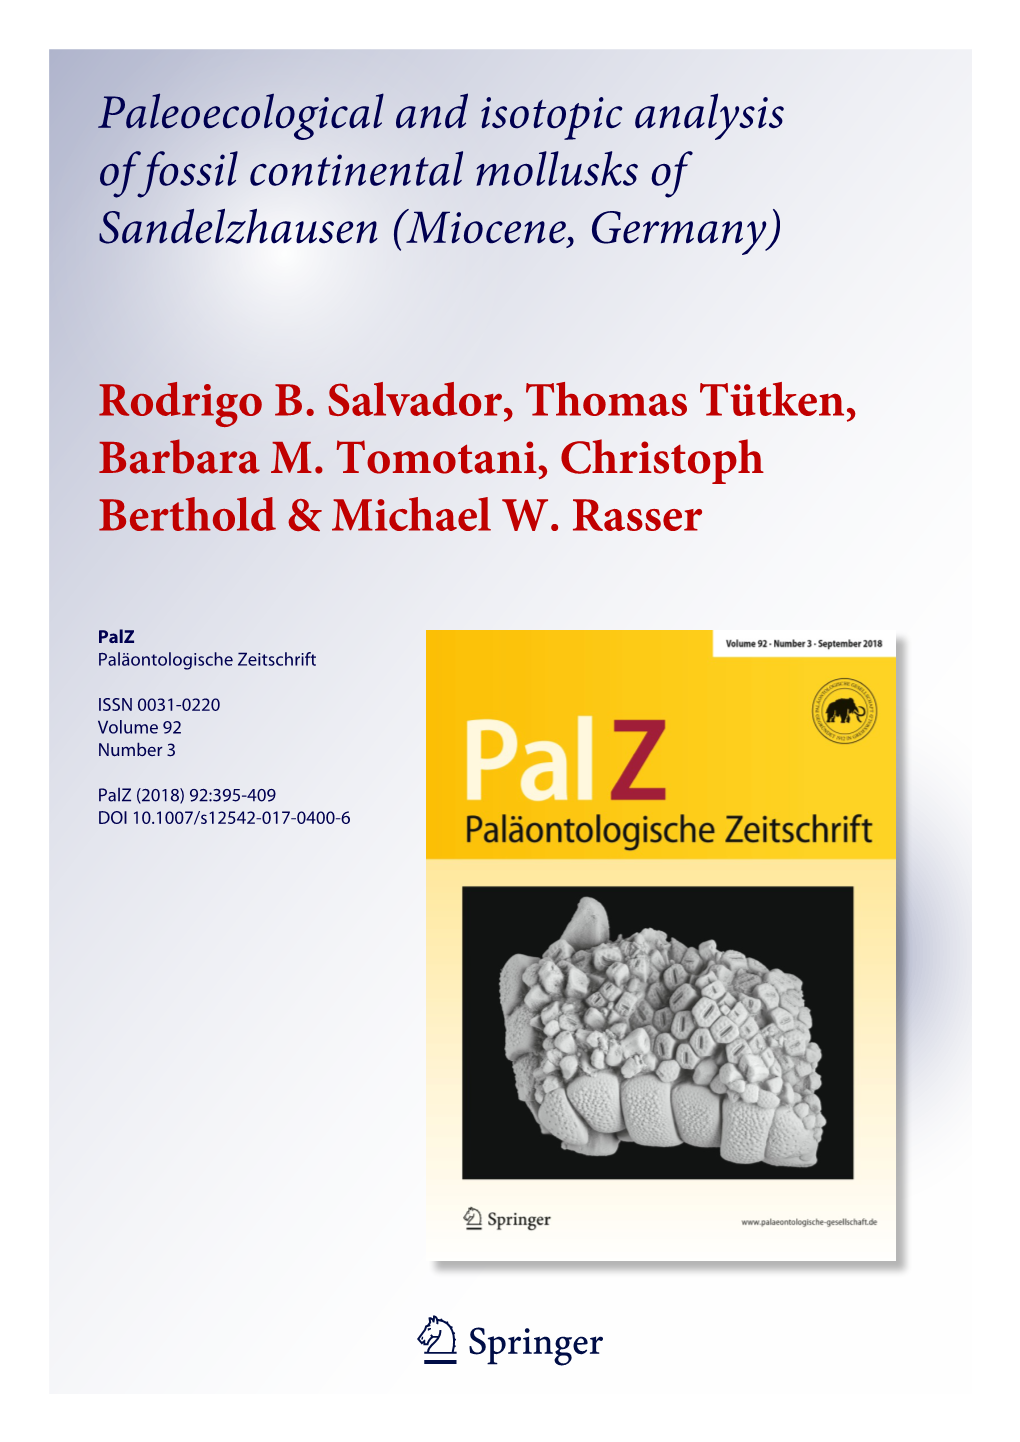 Paleoecological and Isotopic Analysis of Fossil Continental Mollusks of Sandelzhausen (Miocene, Germany)